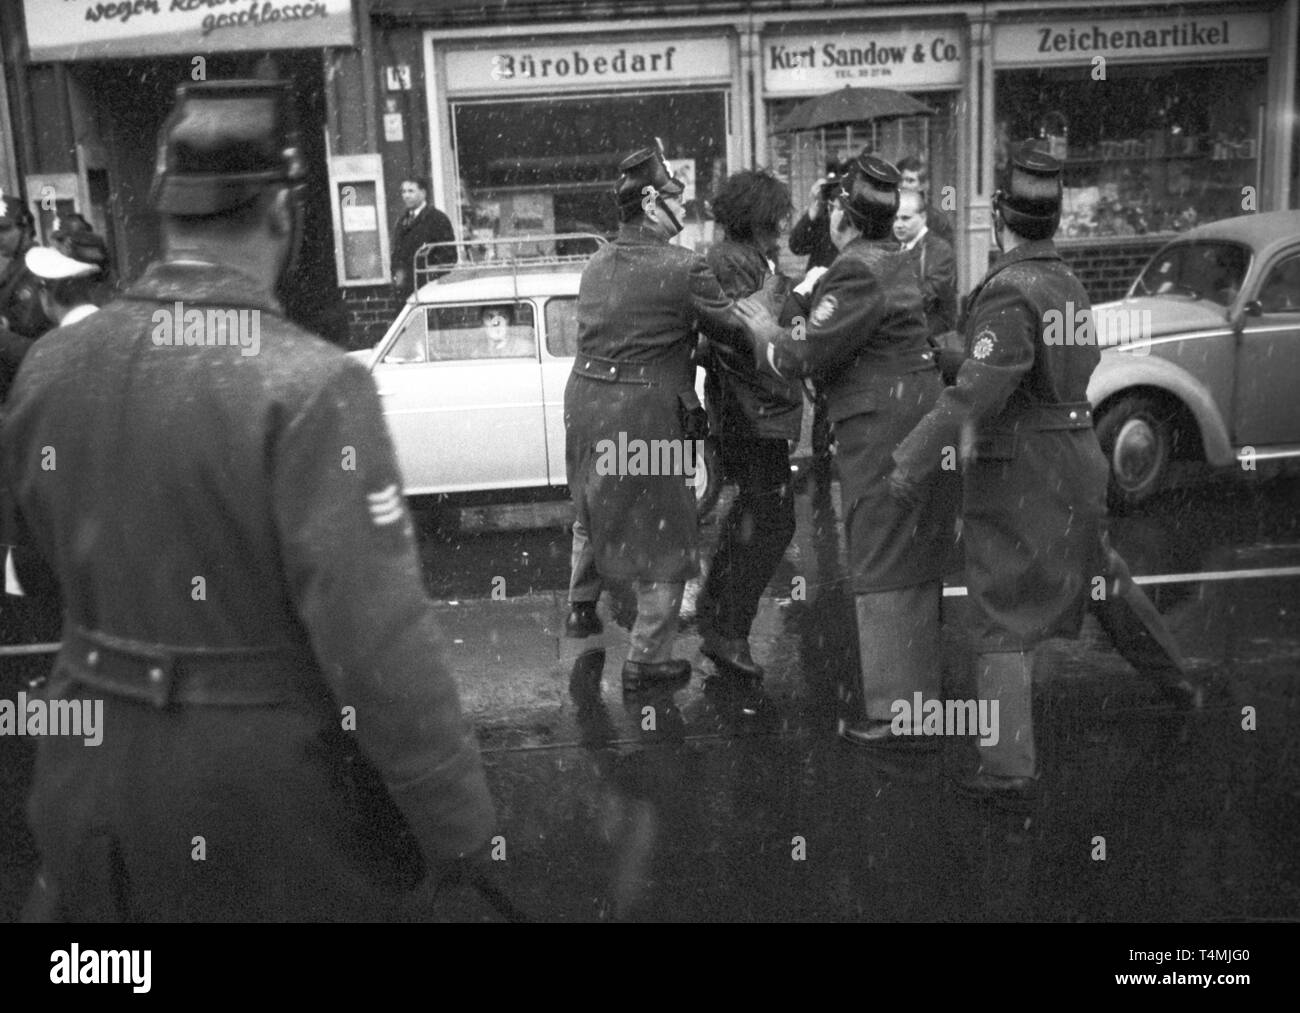 The police uses water guns against demonstrators, who demand Fritz Teufel's release on 27 November 1967. | usage worldwide Stock Photo